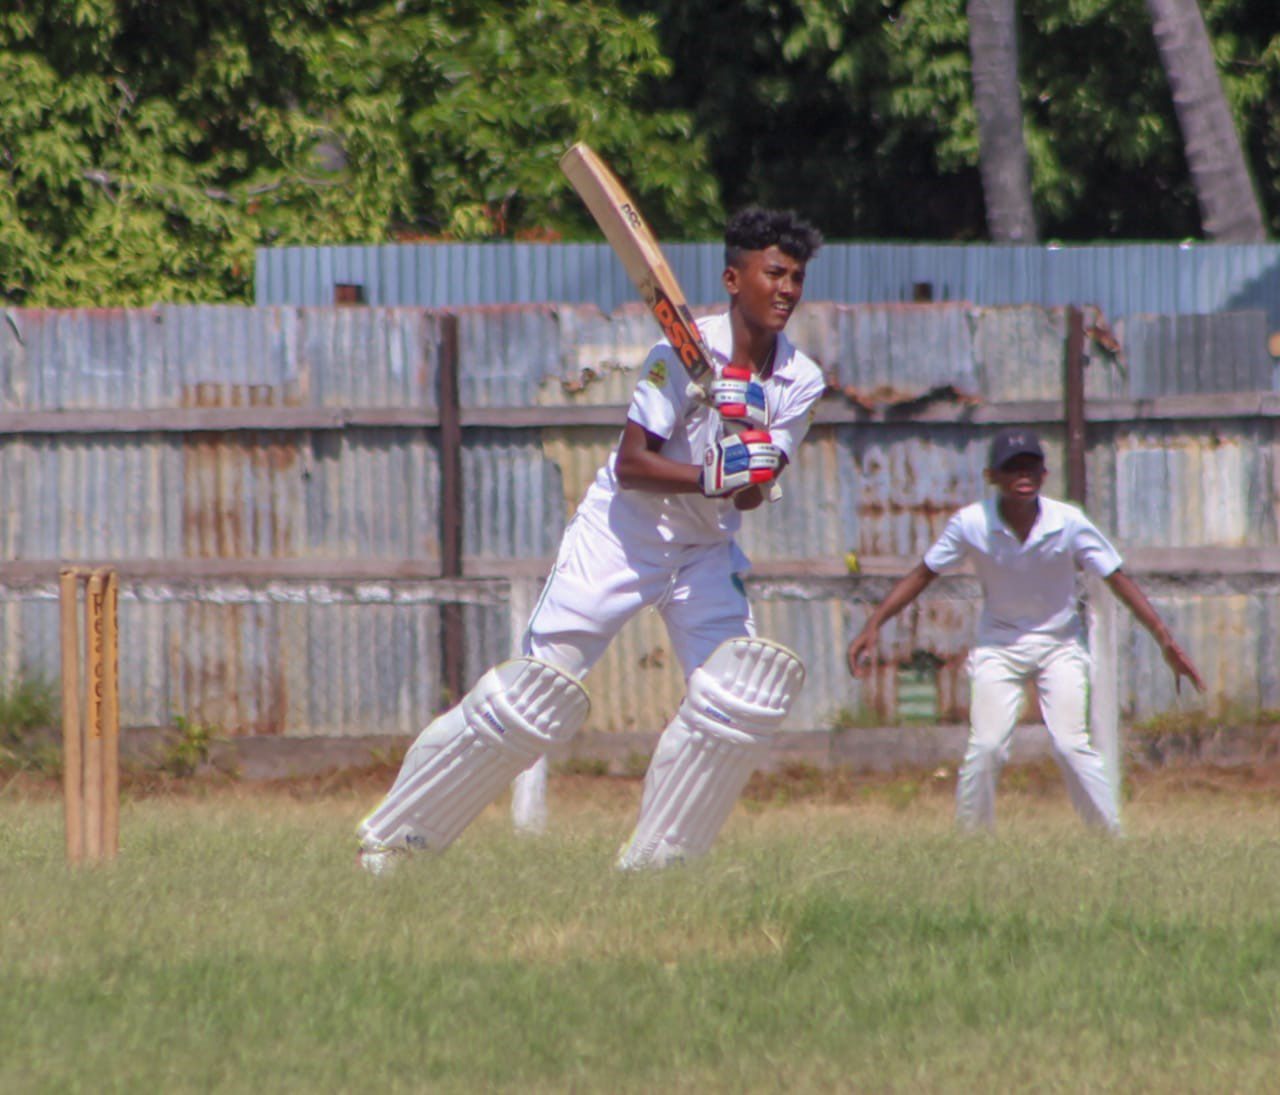 Batsman Rampertab Ramnauth has been shortlisted by the BCB for the U-19 team.